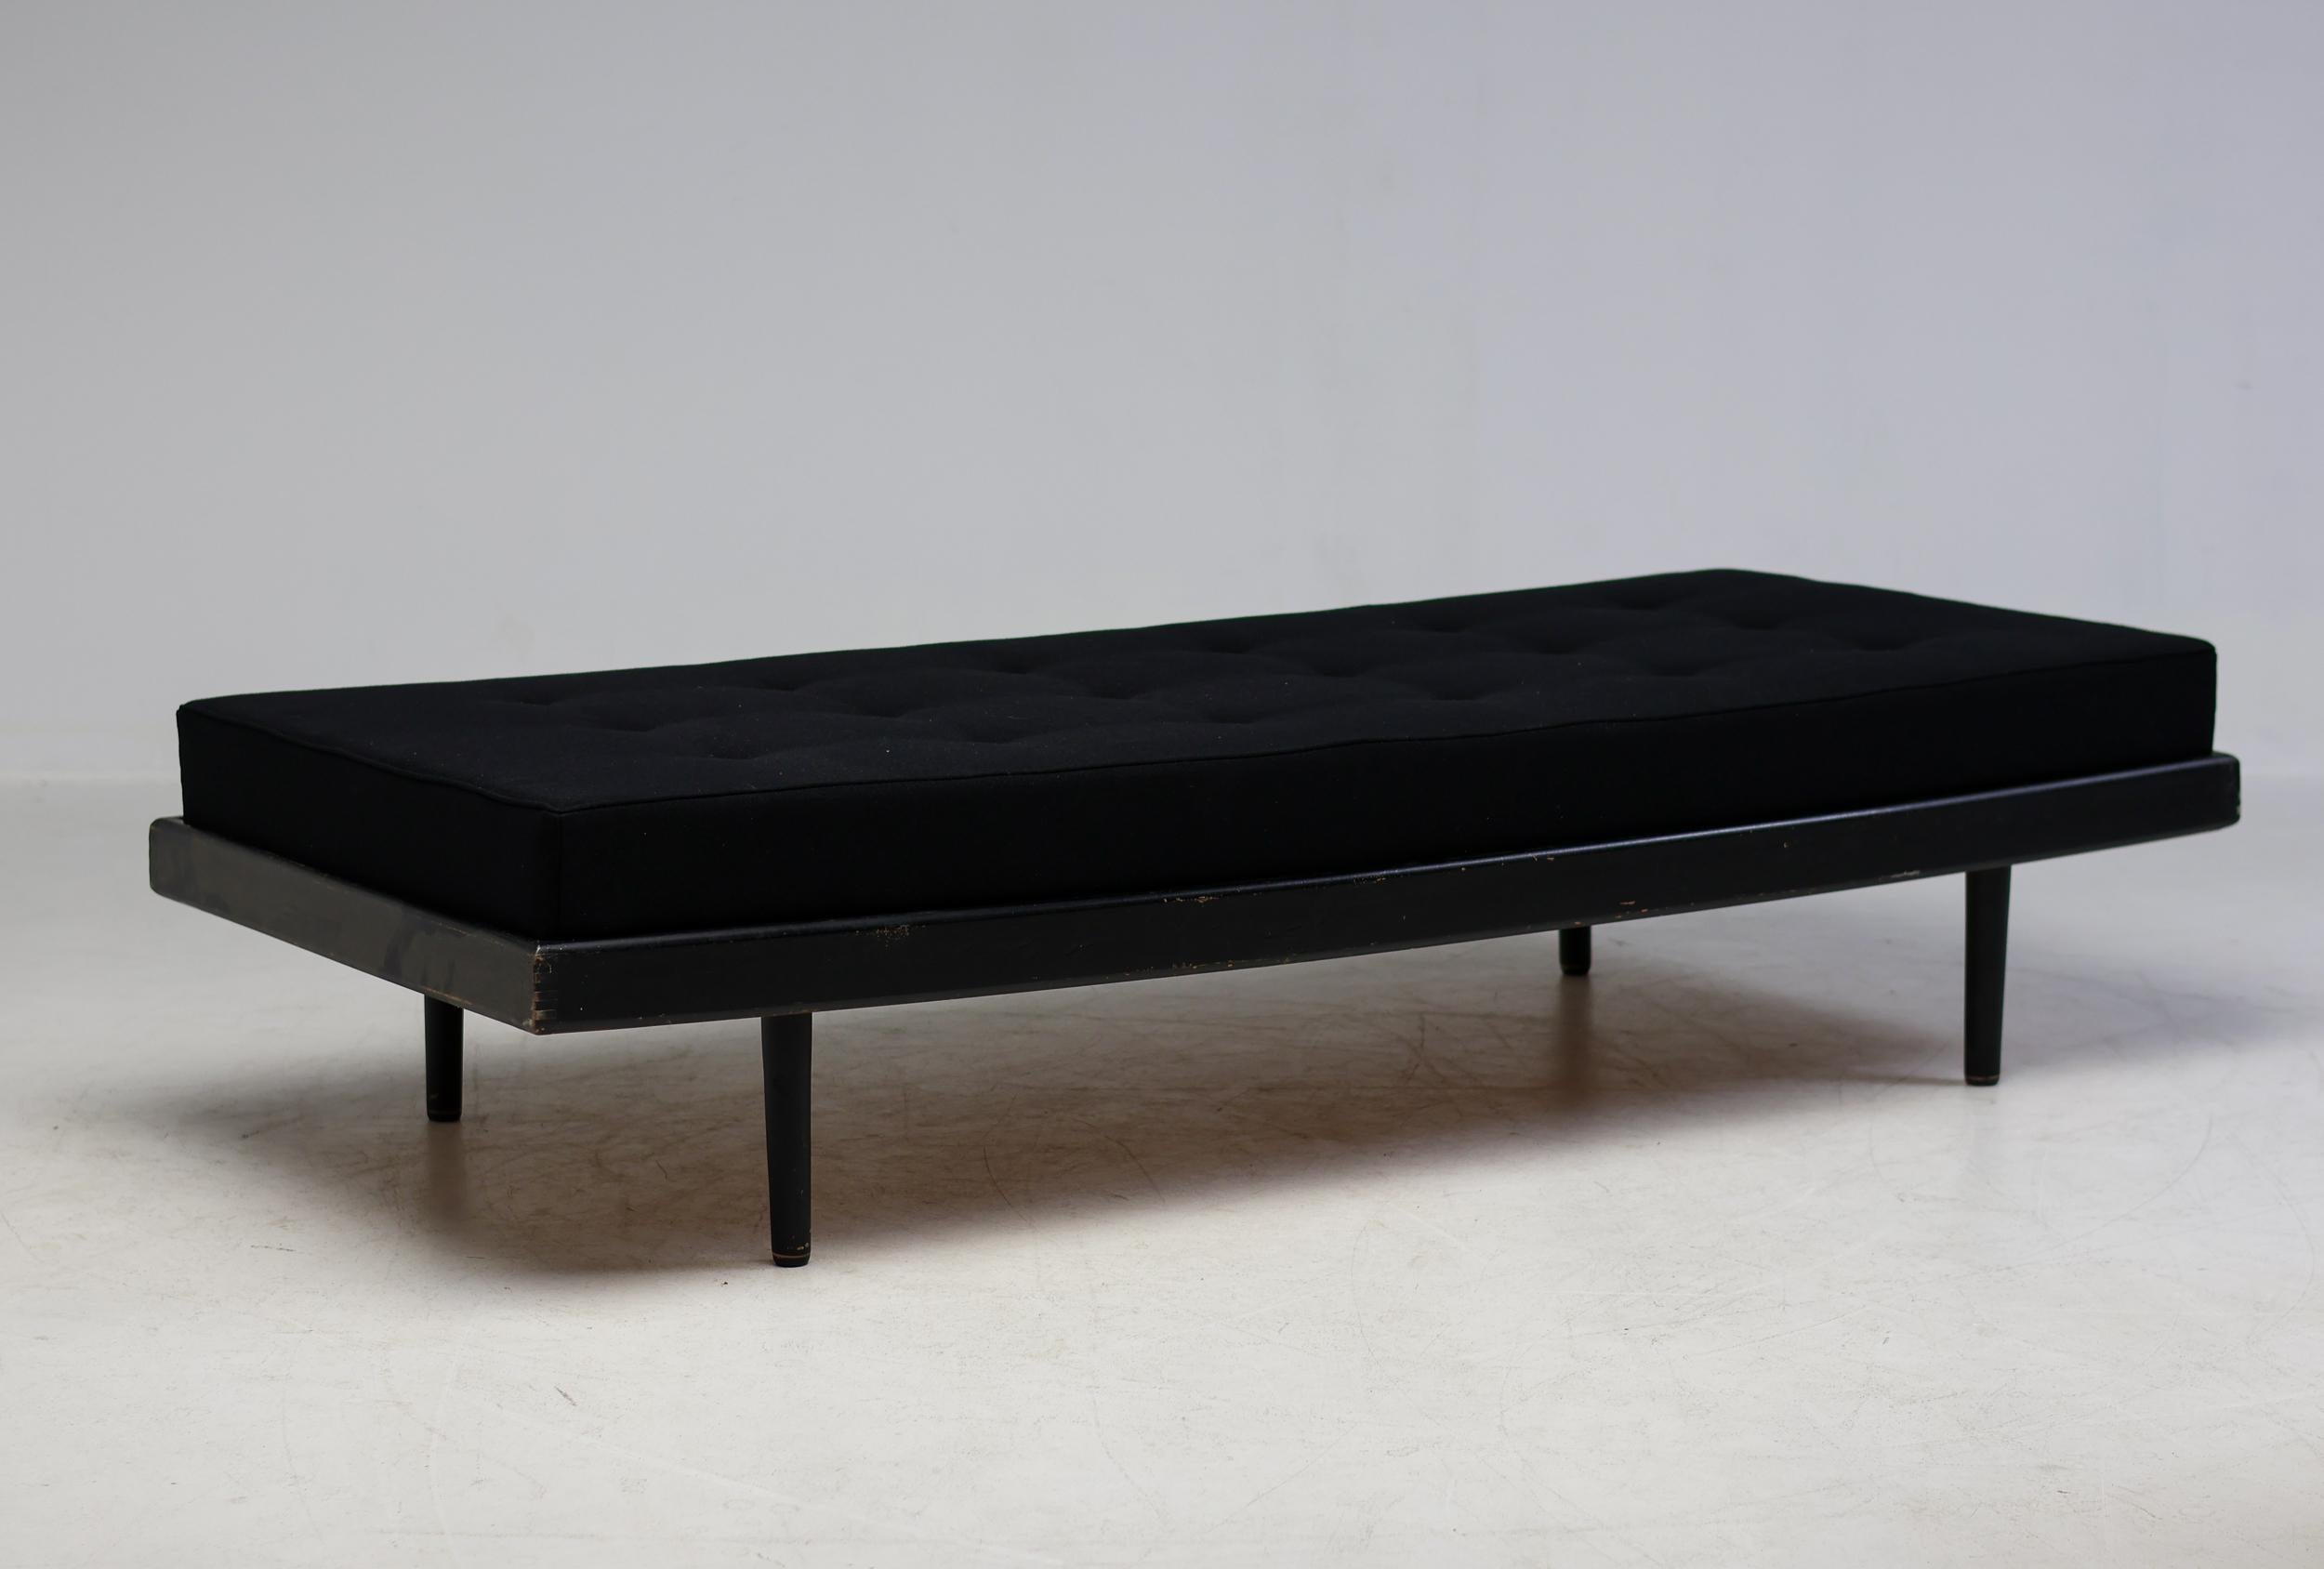 Classic modern daybed in black dye ash and plywood made circa 1960 in France.
Recent mattress upholstered in black fabric.
The edges of the ash frame have some minor scuffs as shown in the photos, the mattress was never used and is in immaculate